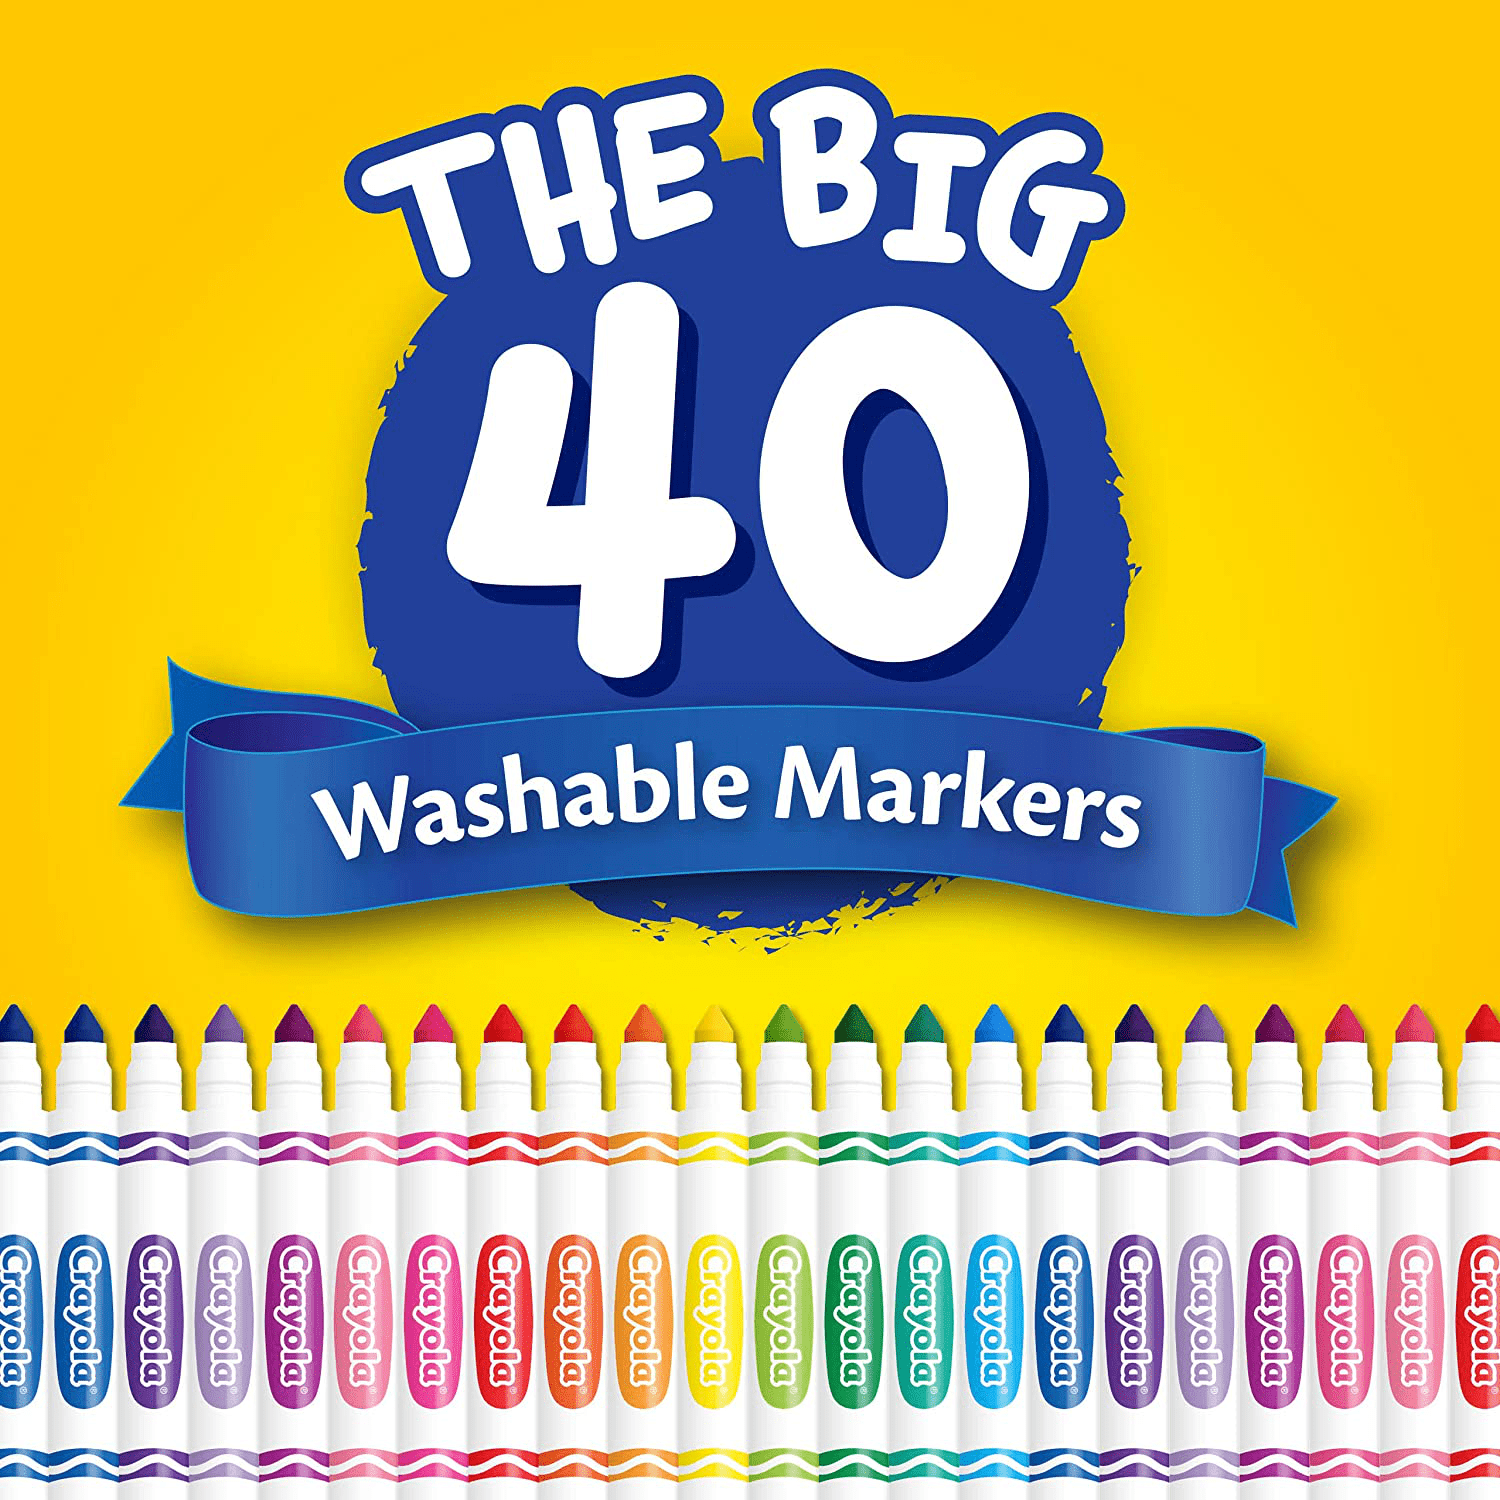 Great Value, Crayola® Ultra-Clean Washable Markers, Broad Bullet